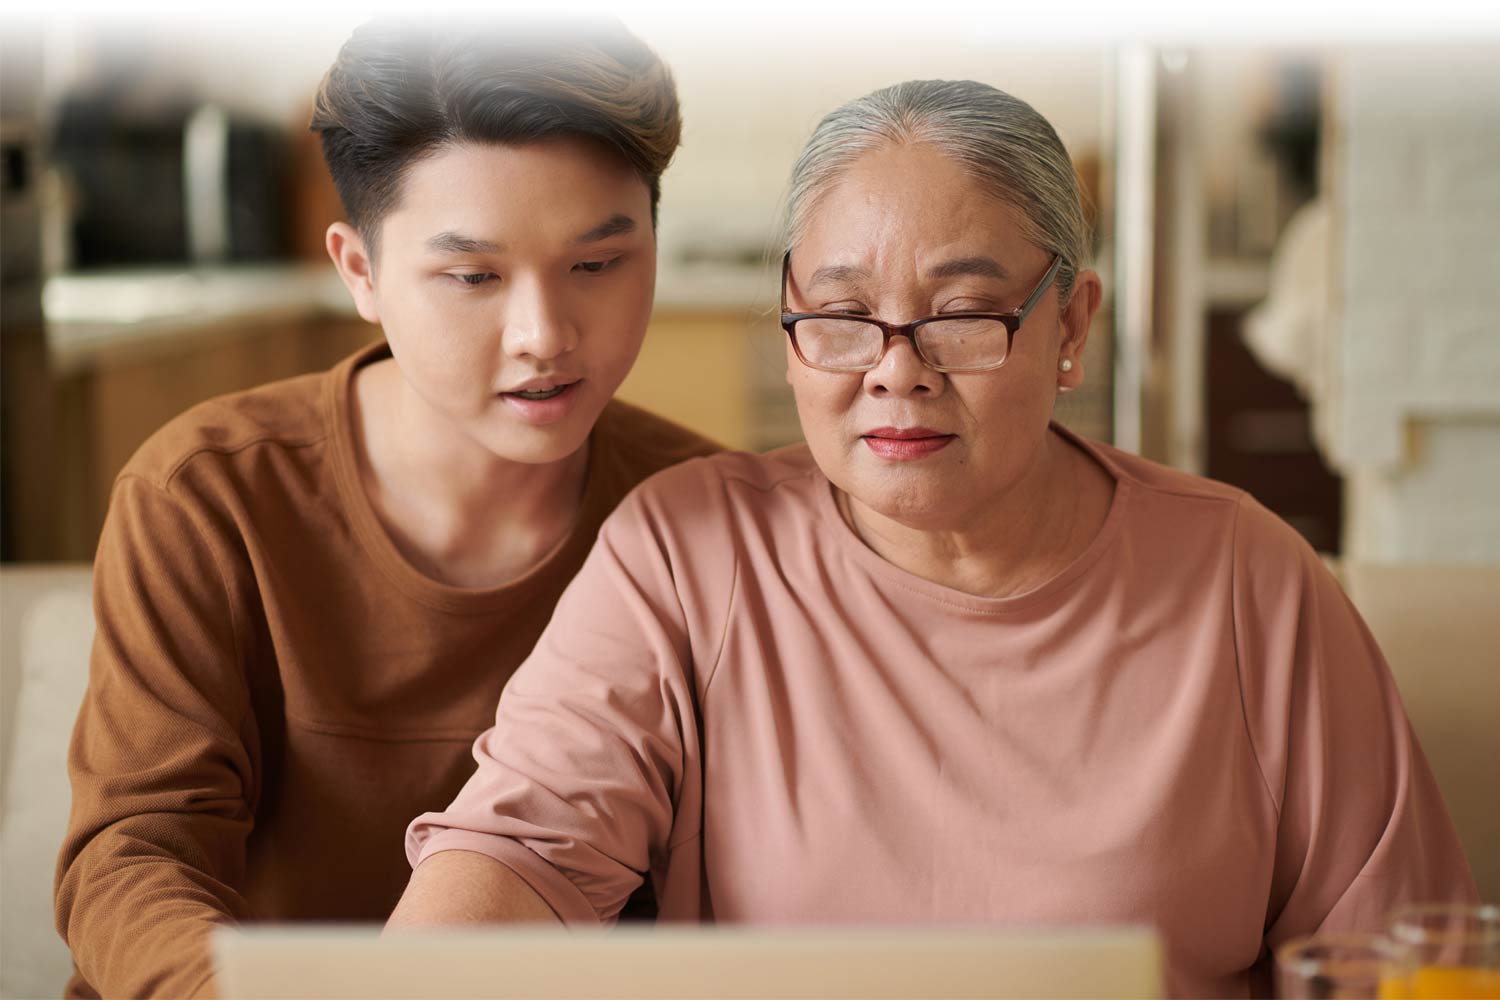 Grandmother and grandson looking at a computer together